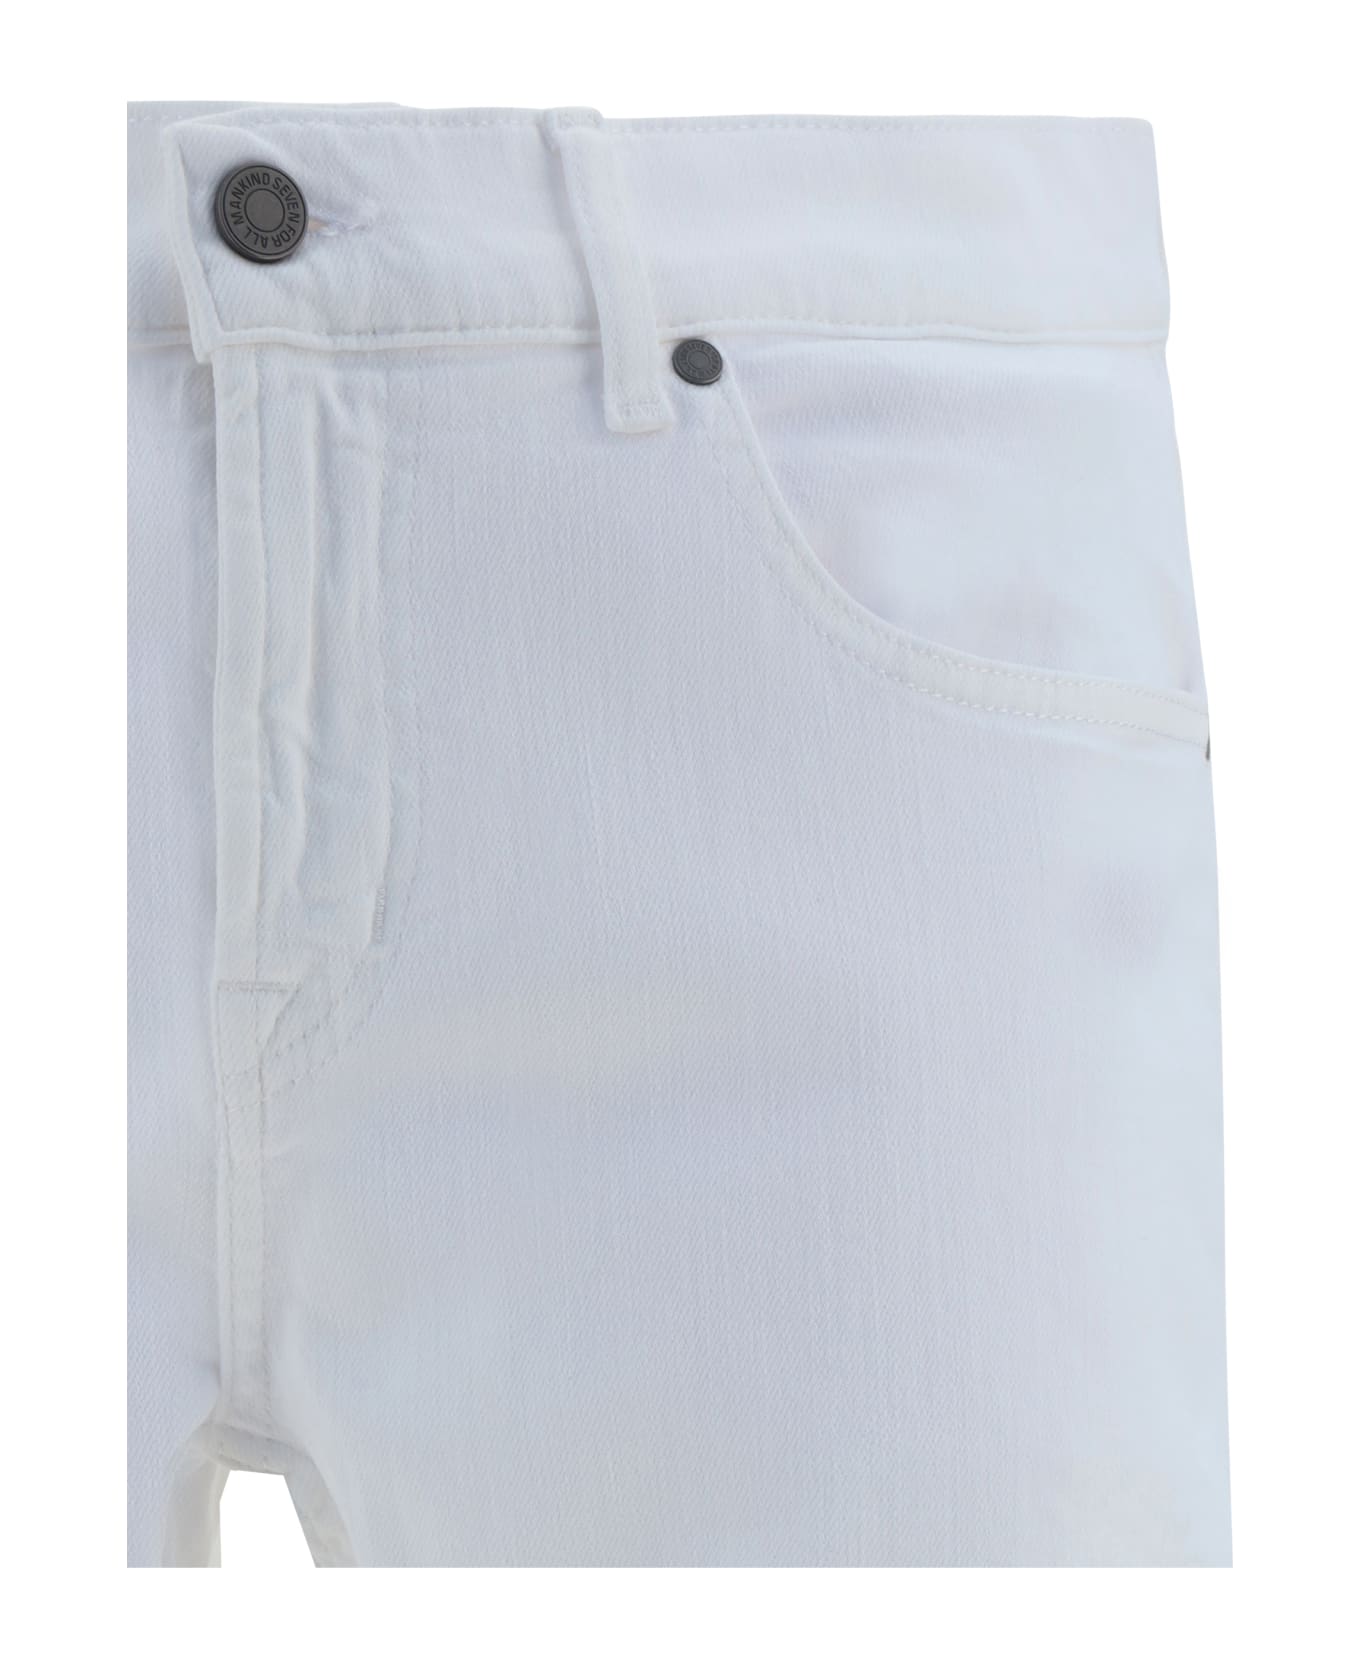 7 For All Mankind Luxe Pants - White